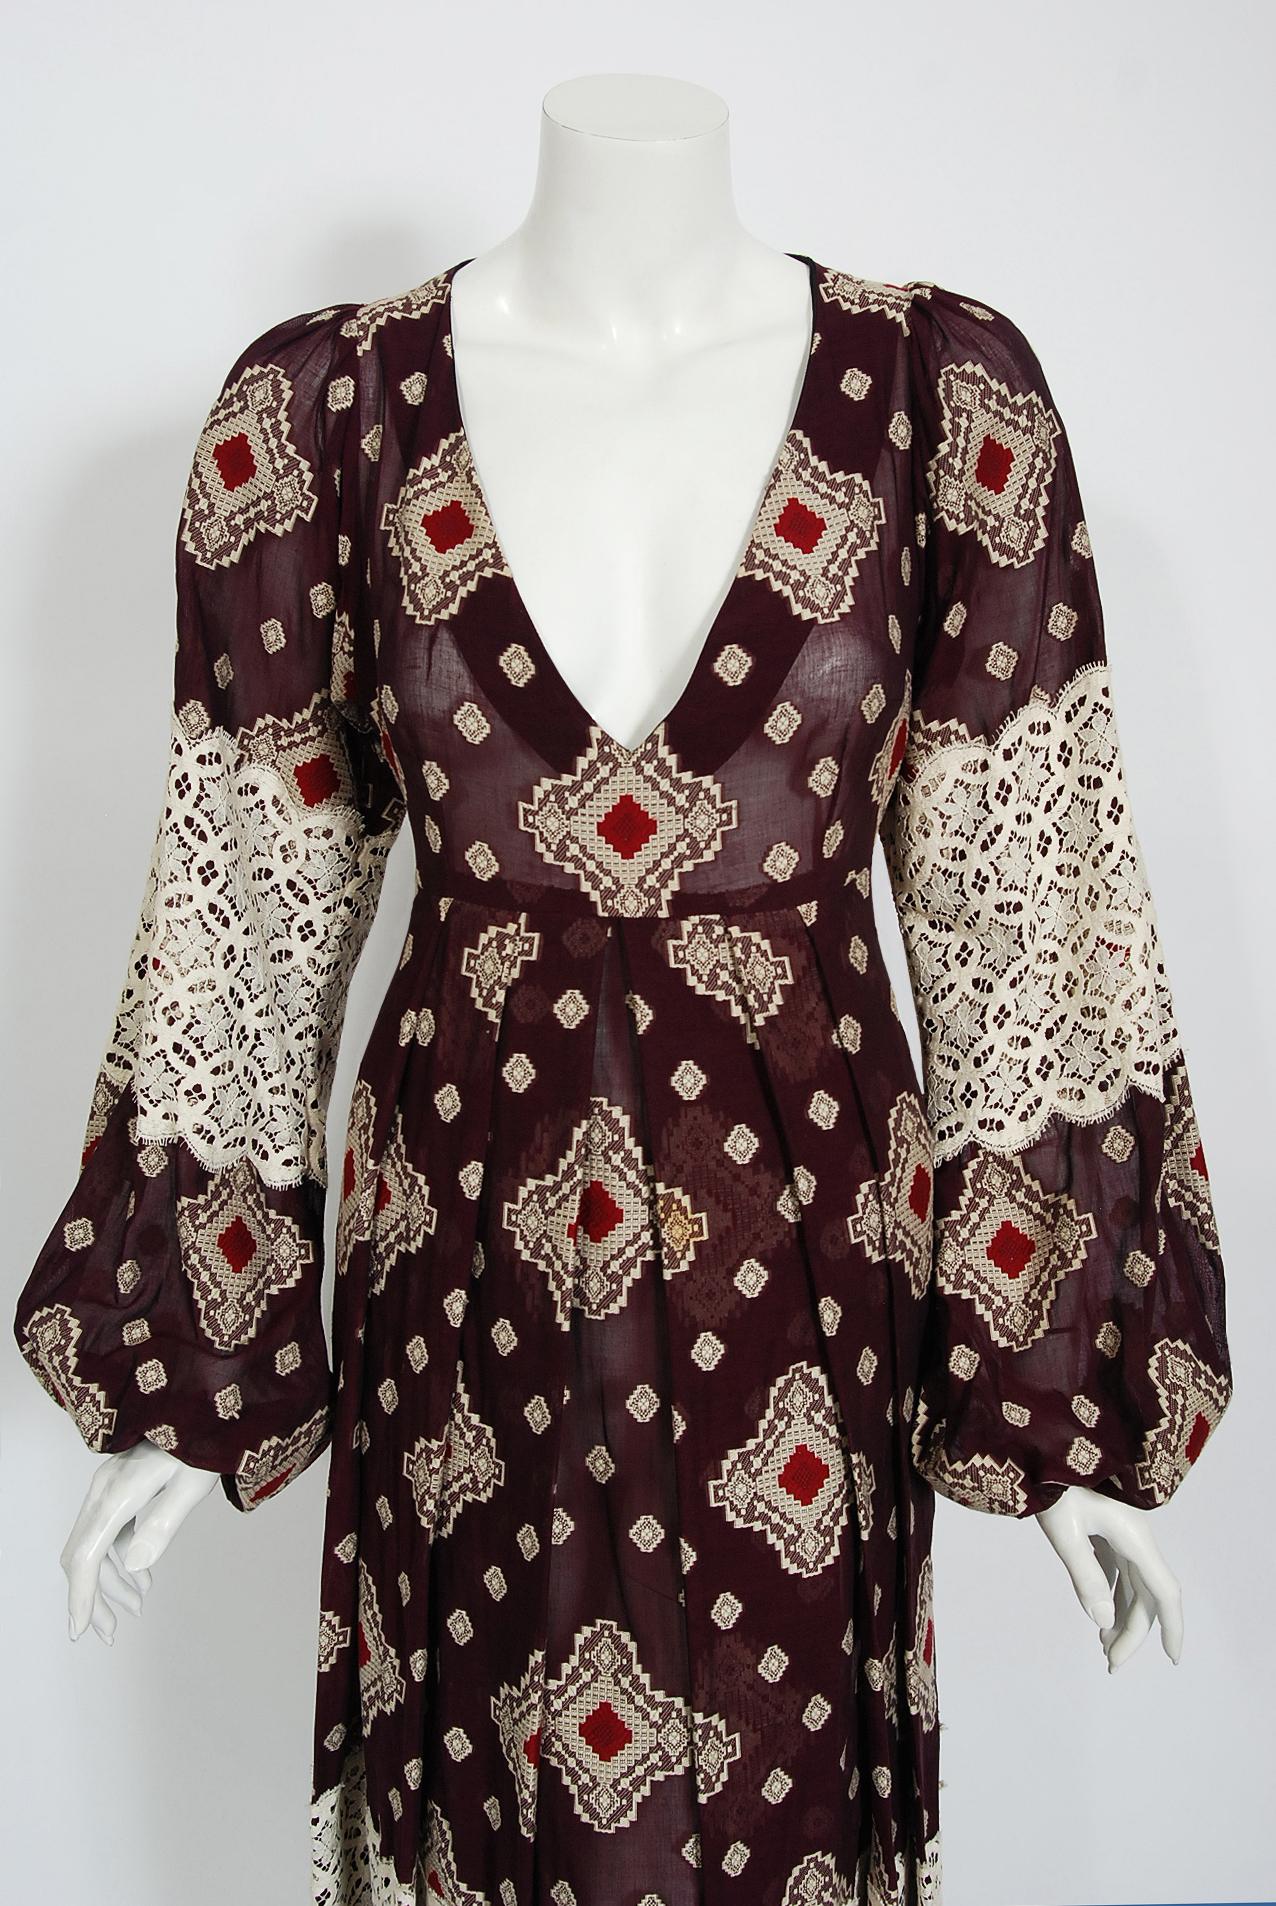 Gorgeous early-1970's Thea Porter designer couture dress fashioned in a magical plum purple cotton gauze brocade  that has red and ivory diamond medallions scattered over its surface. The stunning fabric has a touch of sheerness which I love. The